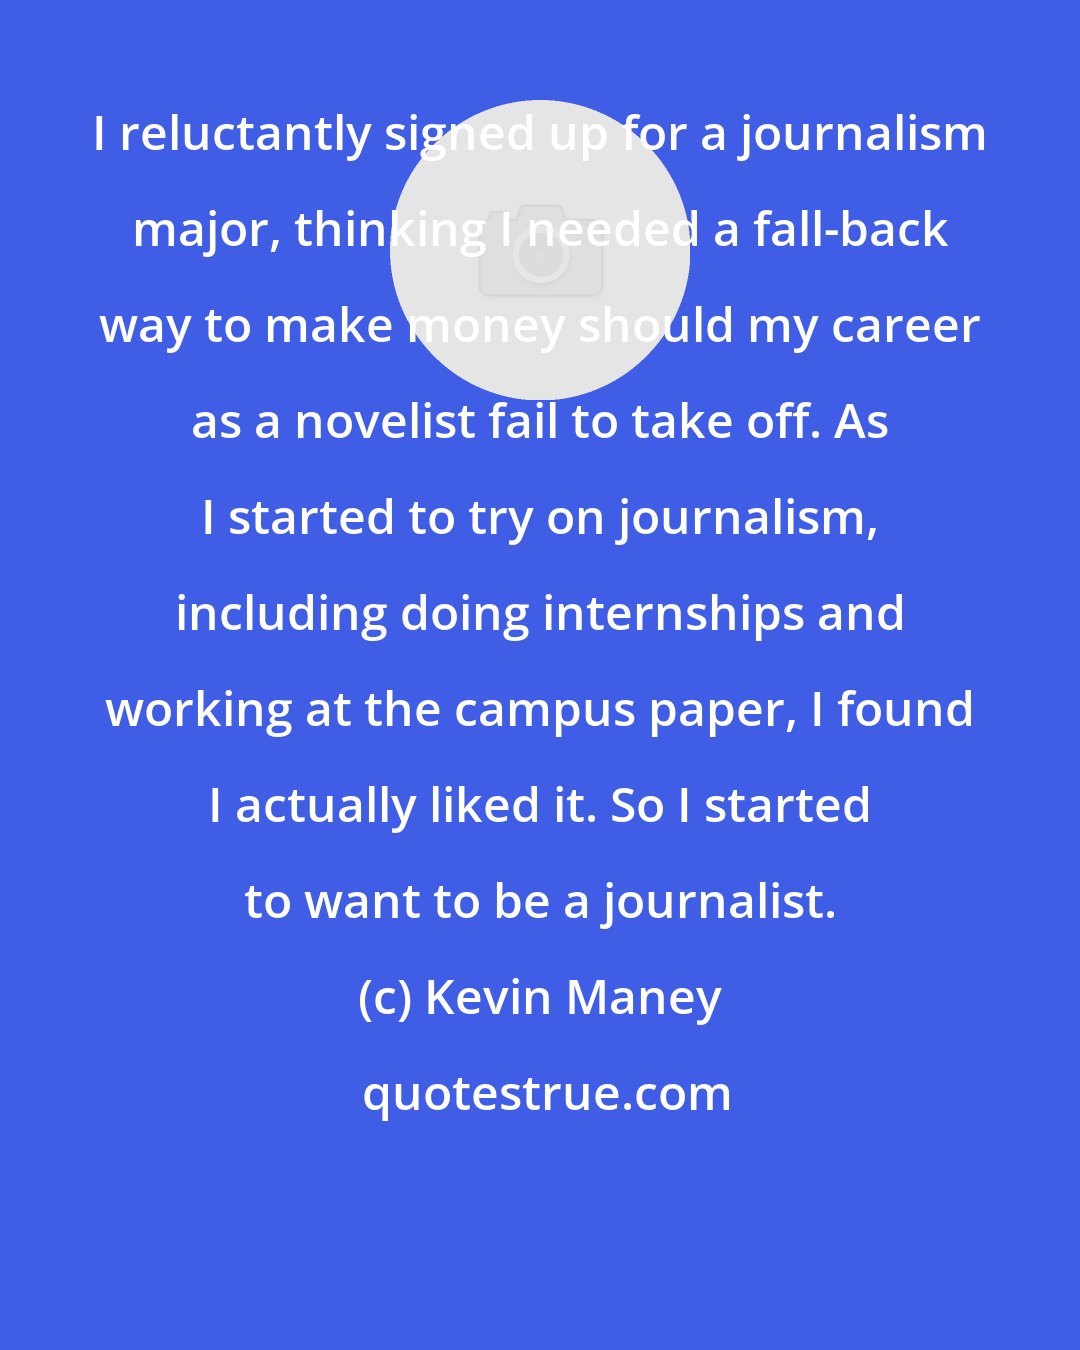 Kevin Maney: I reluctantly signed up for a journalism major, thinking I needed a fall-back way to make money should my career as a novelist fail to take off. As I started to try on journalism, including doing internships and working at the campus paper, I found I actually liked it. So I started to want to be a journalist.